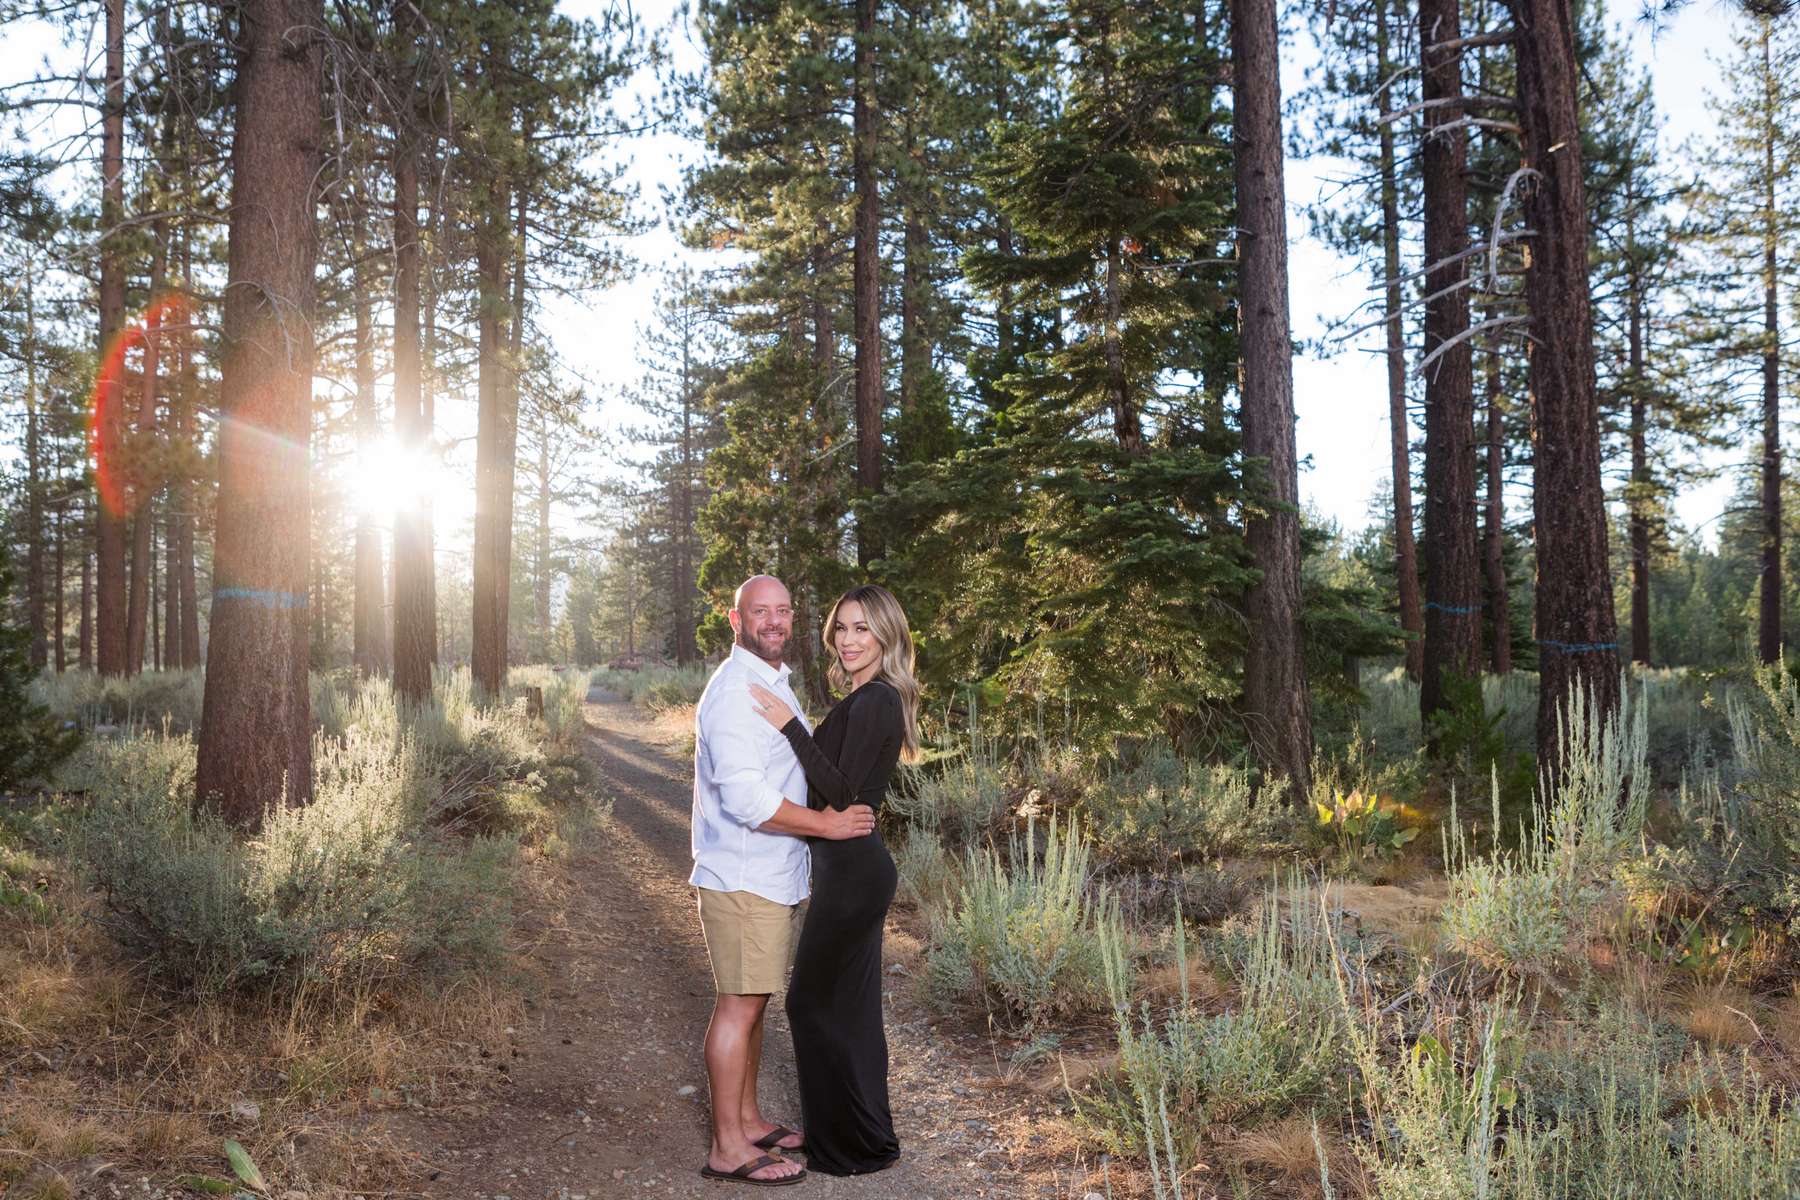 Capturing Love in Lake Tahoe! Discover our breathtaking wedding photography that celebrates your special day amidst the stunning landscapes of Lake Tahoe. Expertise in natural light, candid moments, and timeless memories. Contact us for your dream wedding memories